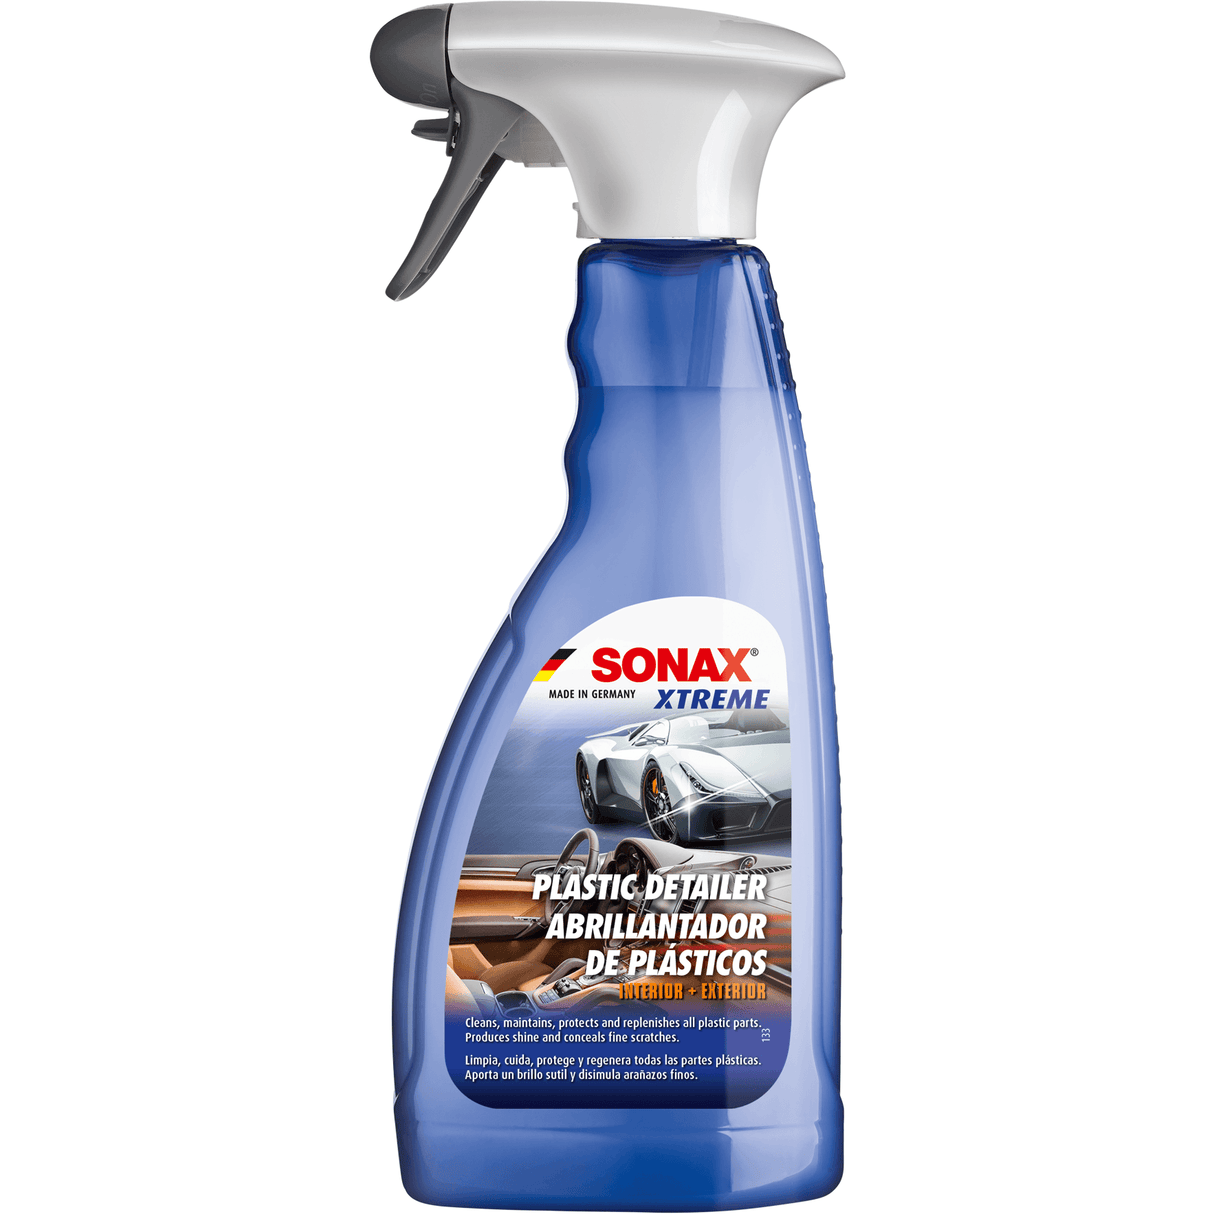 SONAX Xtreme Kunststof Detailer 750ml - Xpert Cleaning